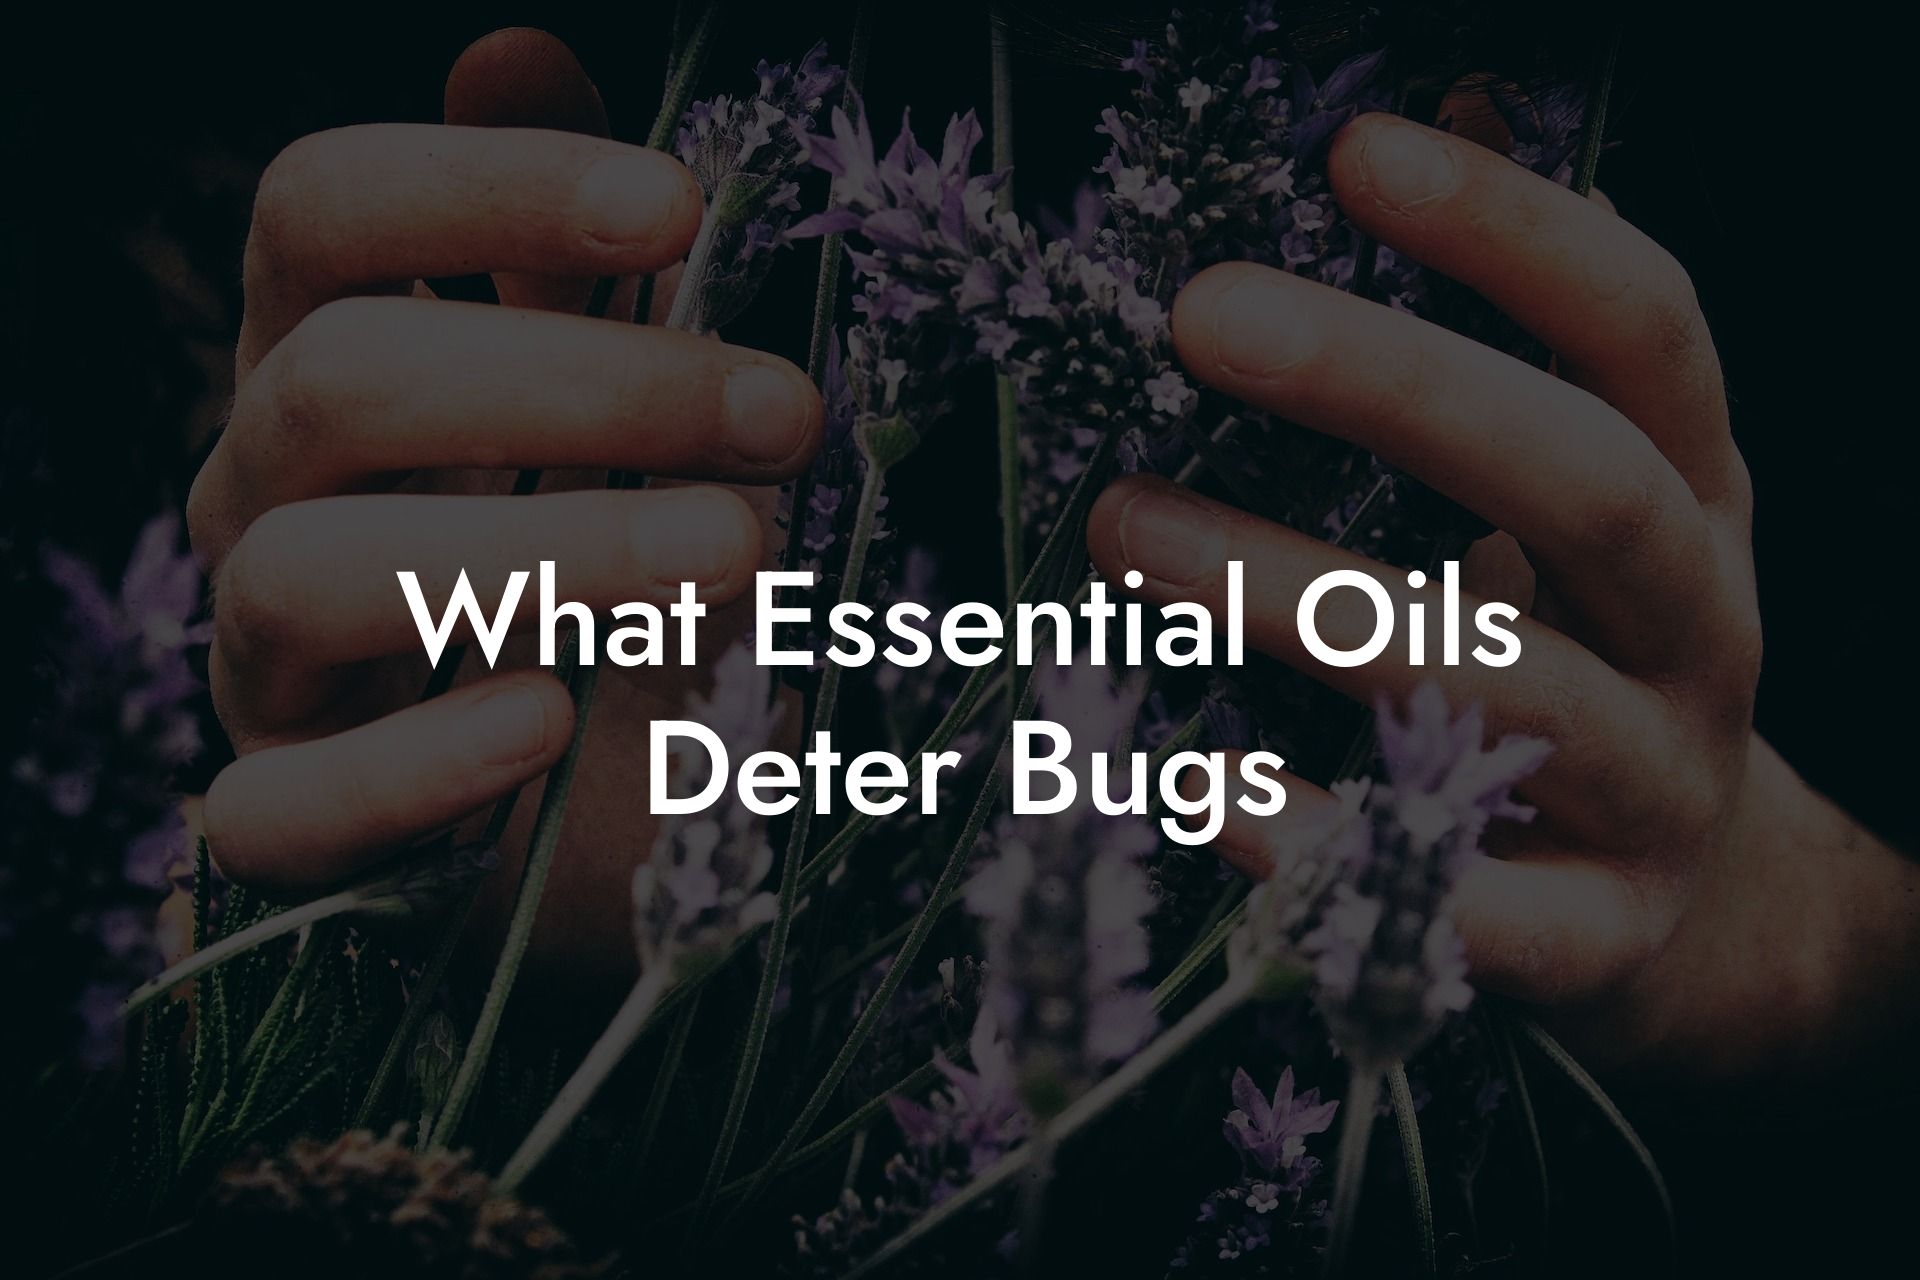 What Essential Oils Deter Bugs